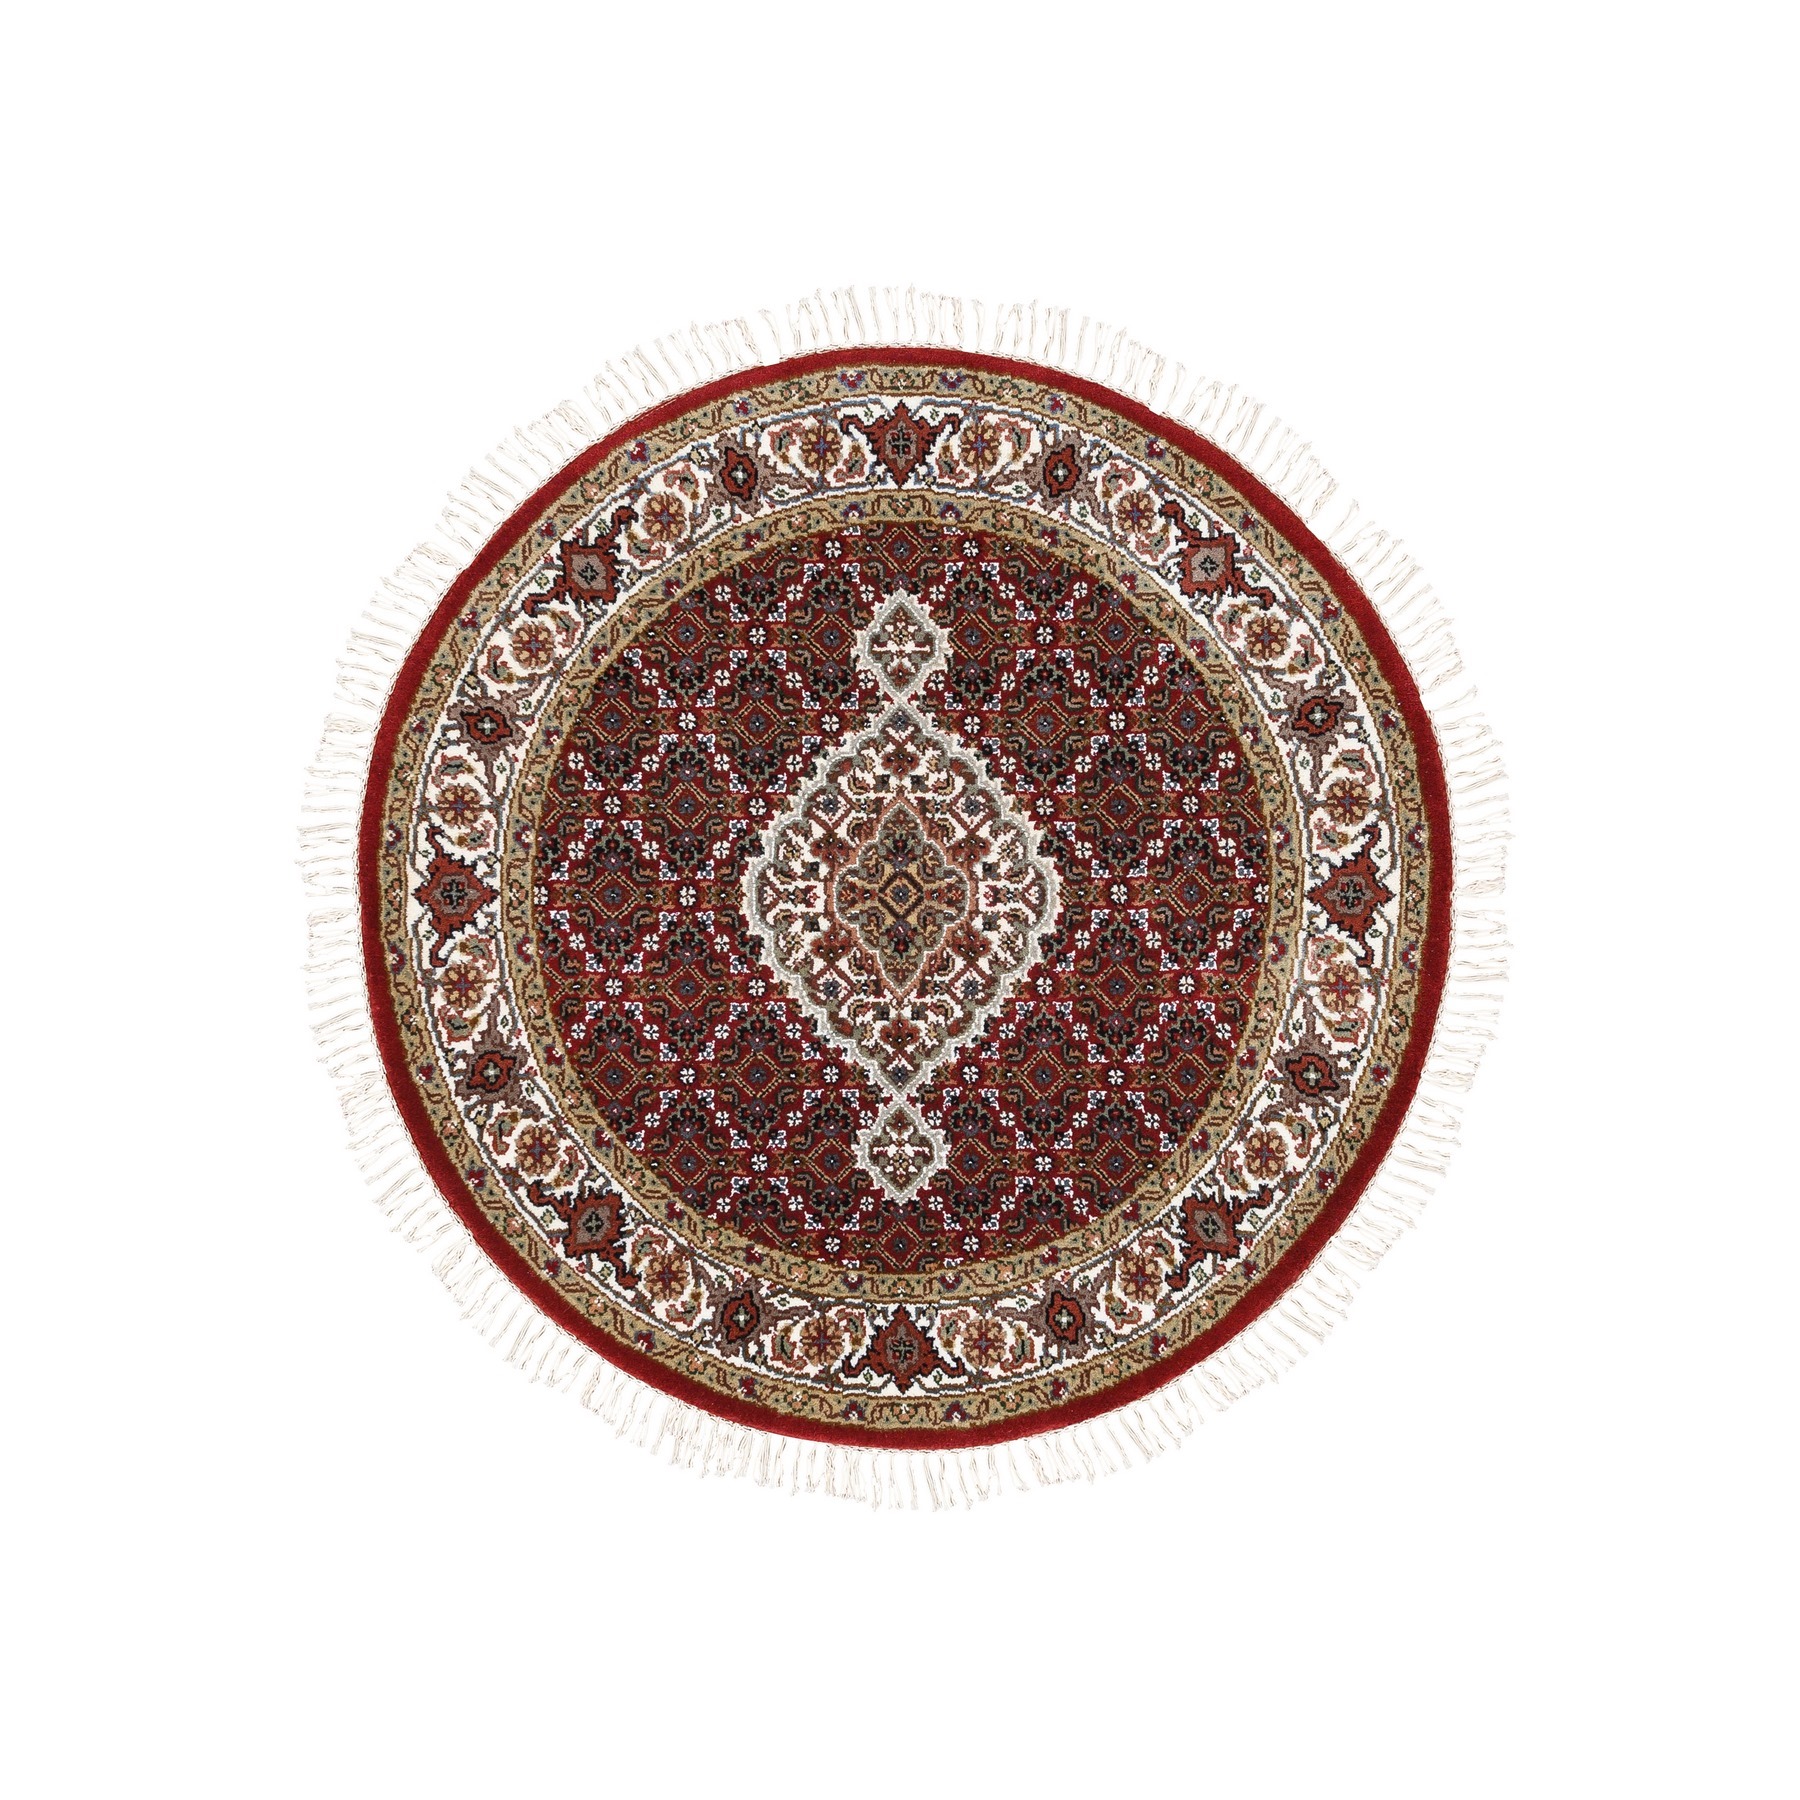 Pirniakan Collection Hand Knotted Red Rug No: 1124906